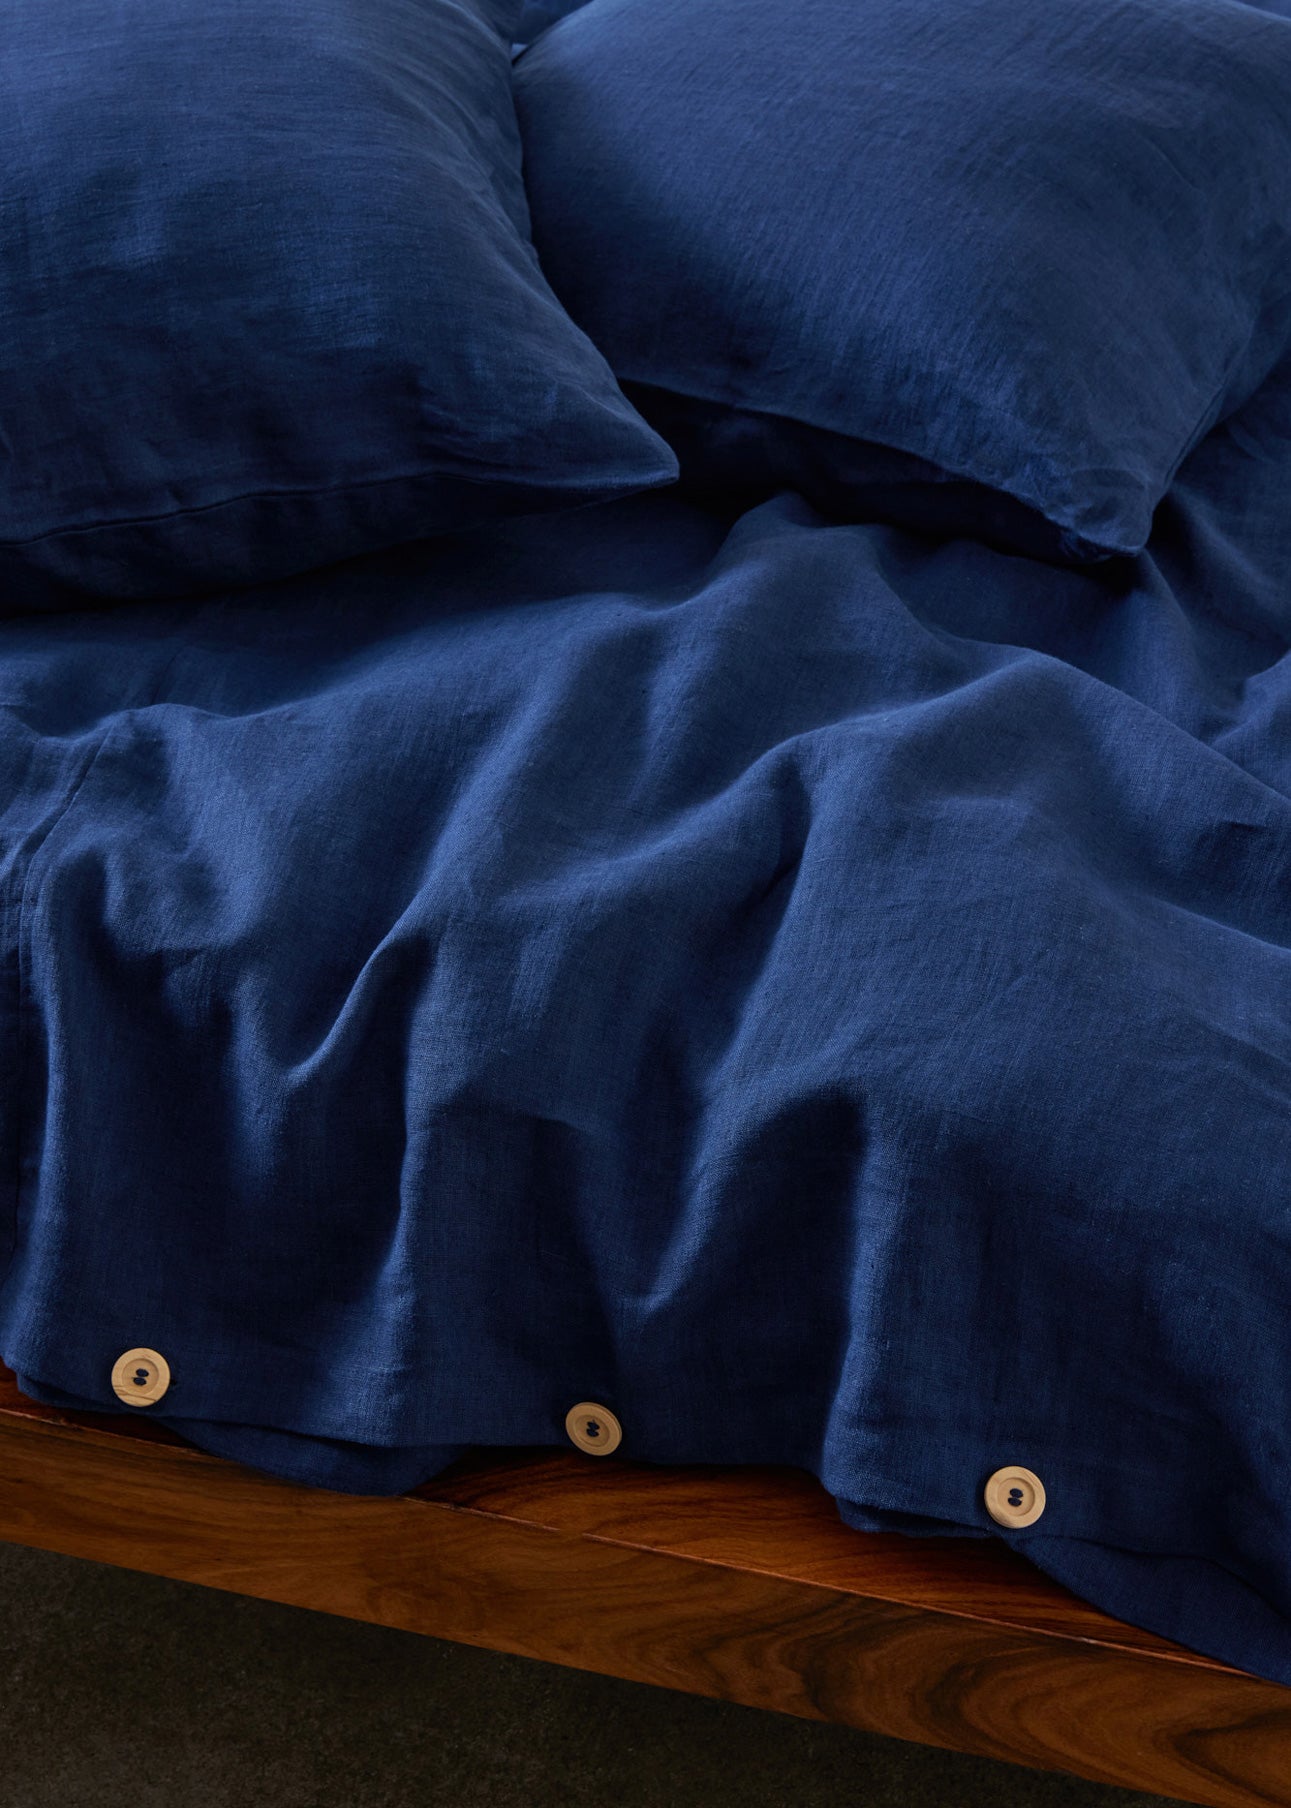 Linuhn linen bedding sheets in Baltic navy blue natural fabric organic and ethically made